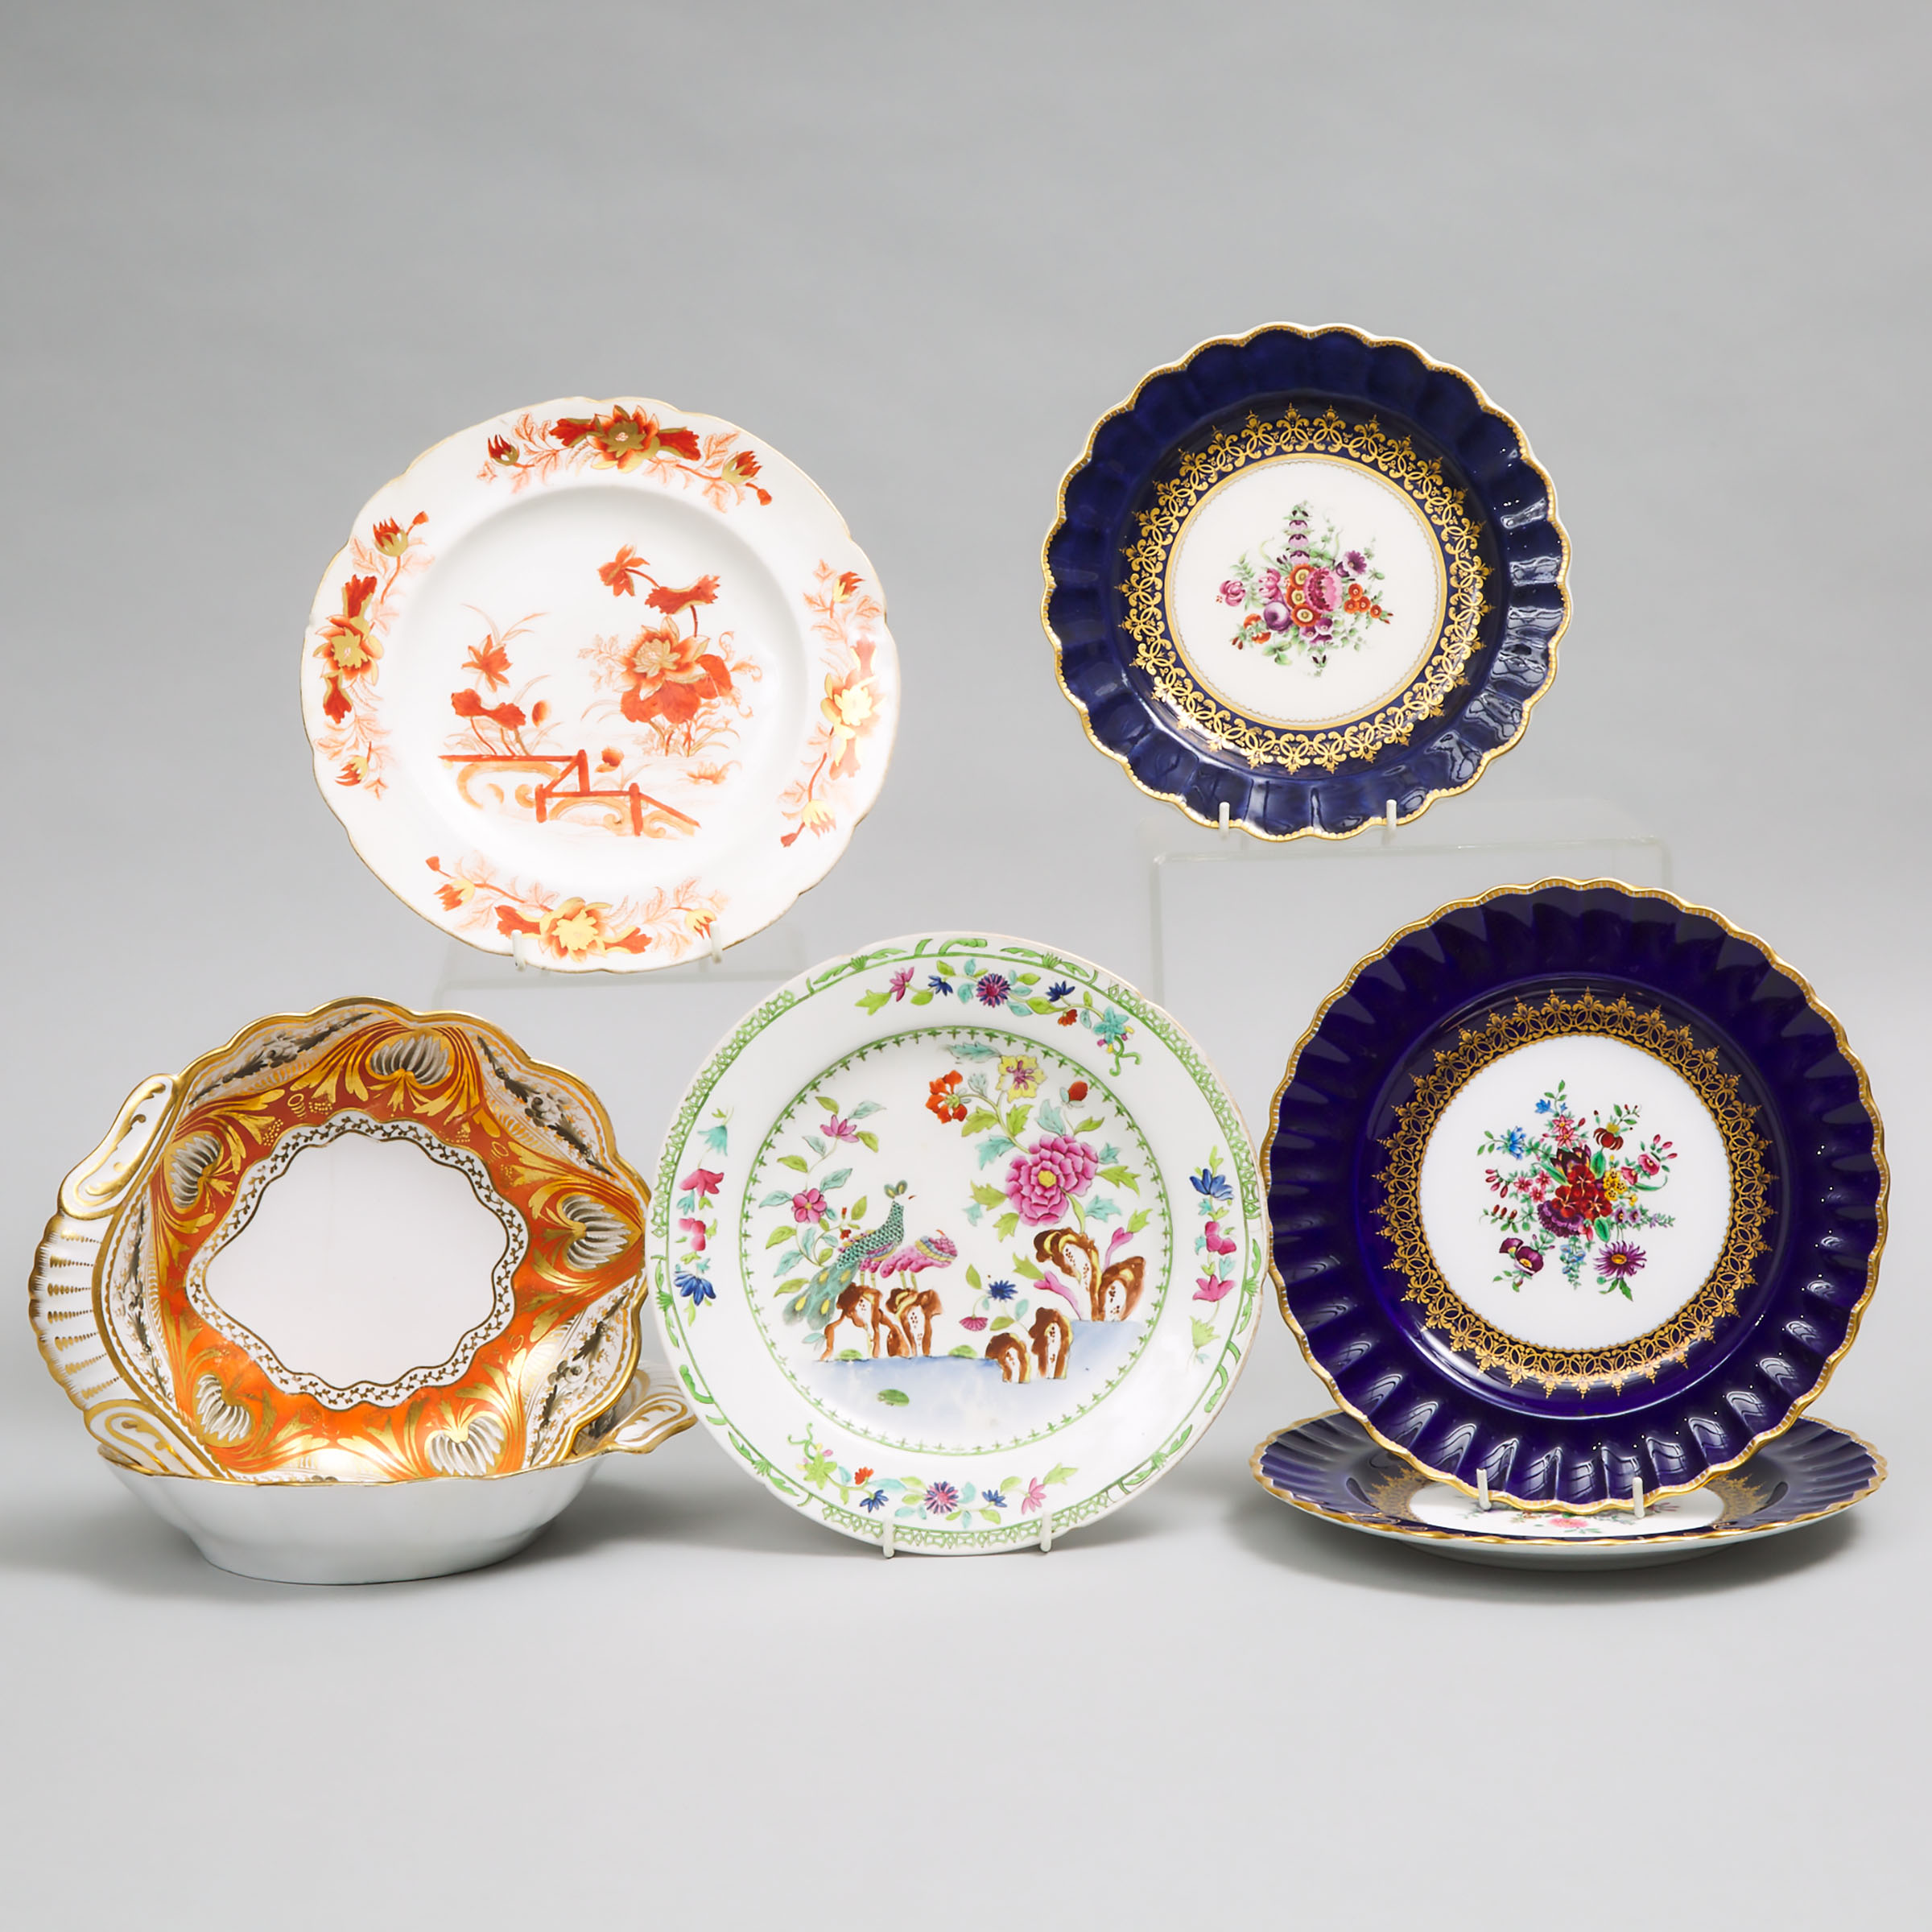 Five English Porcelain Plates and Two Shell Shaped Serving Dishes, 19th century